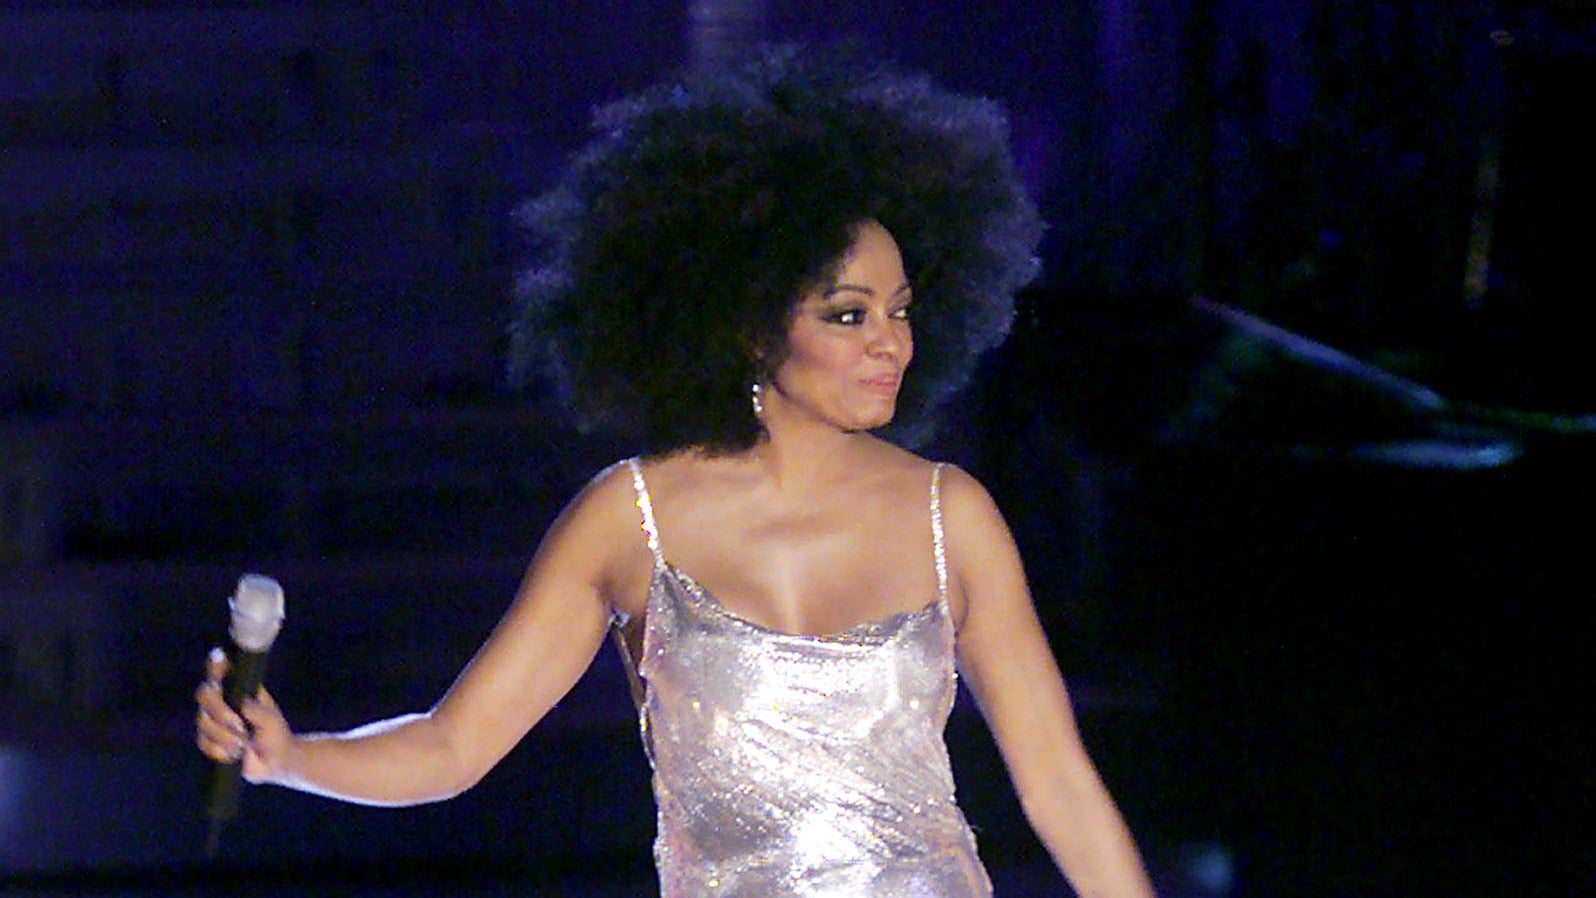 Channeling Nostalgia With This Celebrity Look: Diana Ross